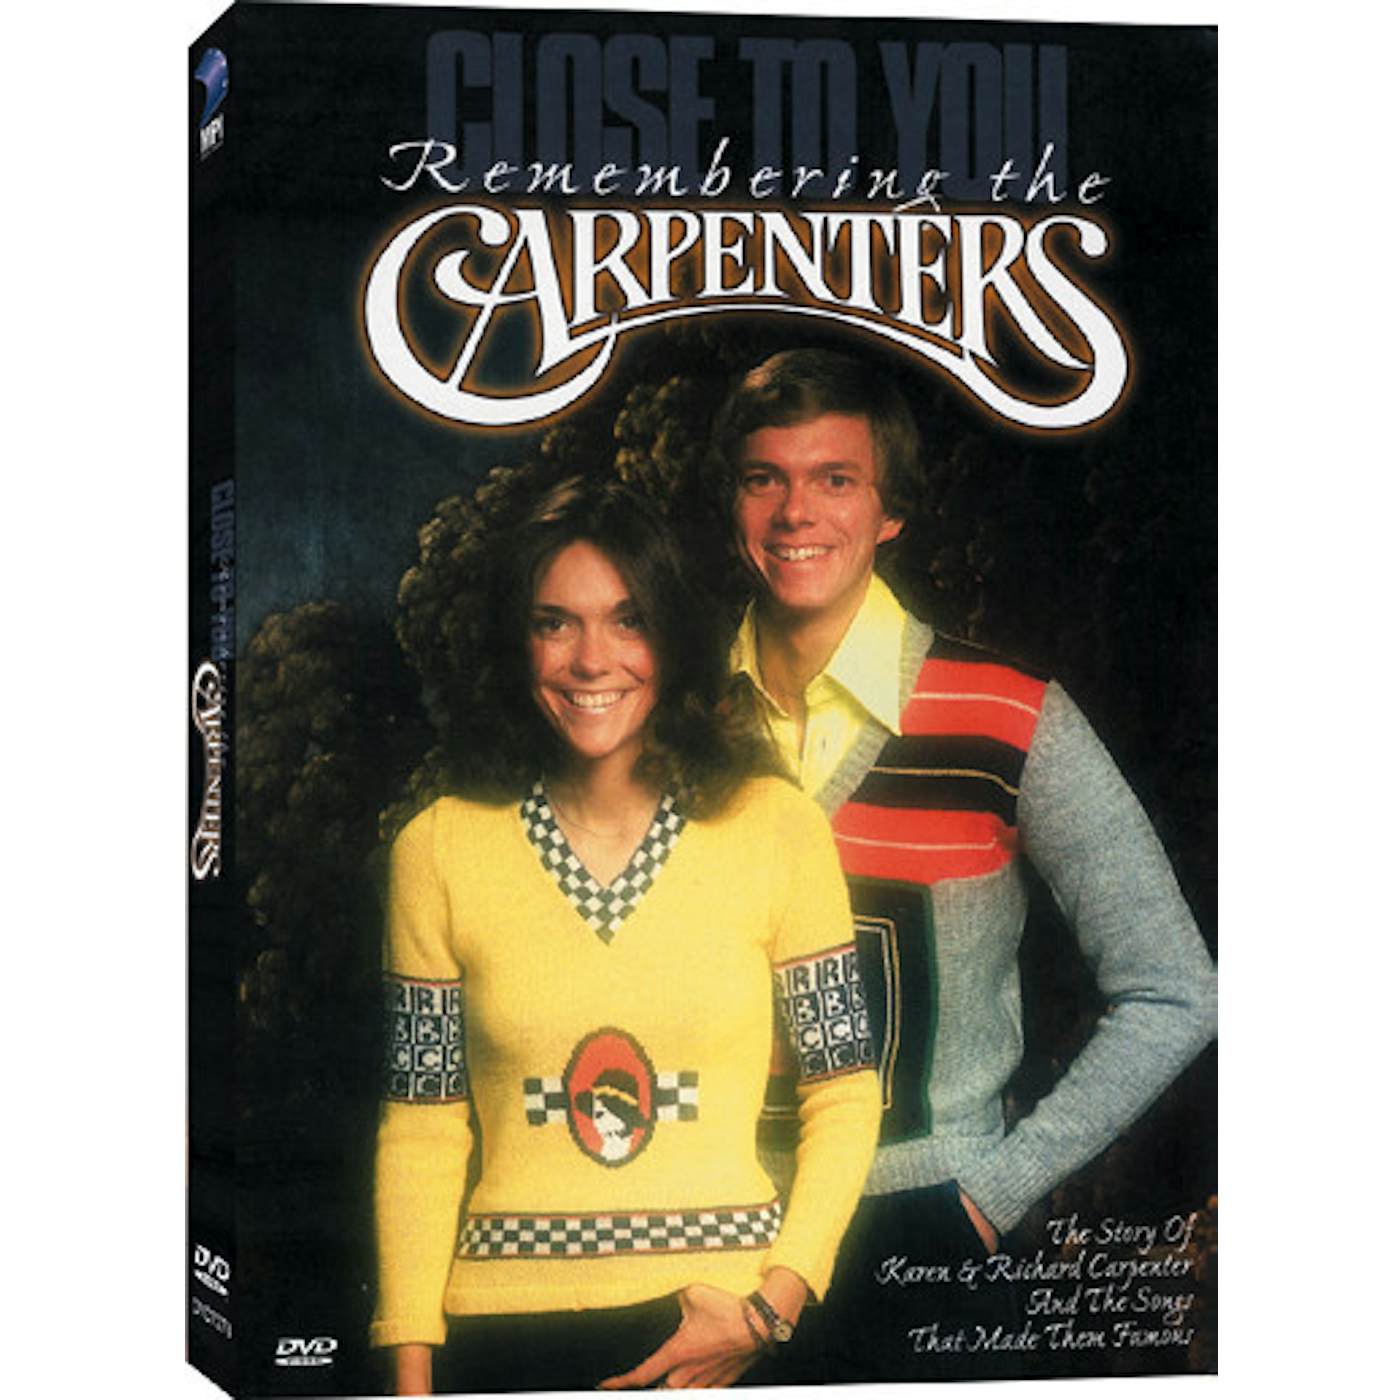 CLOSE TO YOU: REMEMBERING THE CARPENTERS DVD